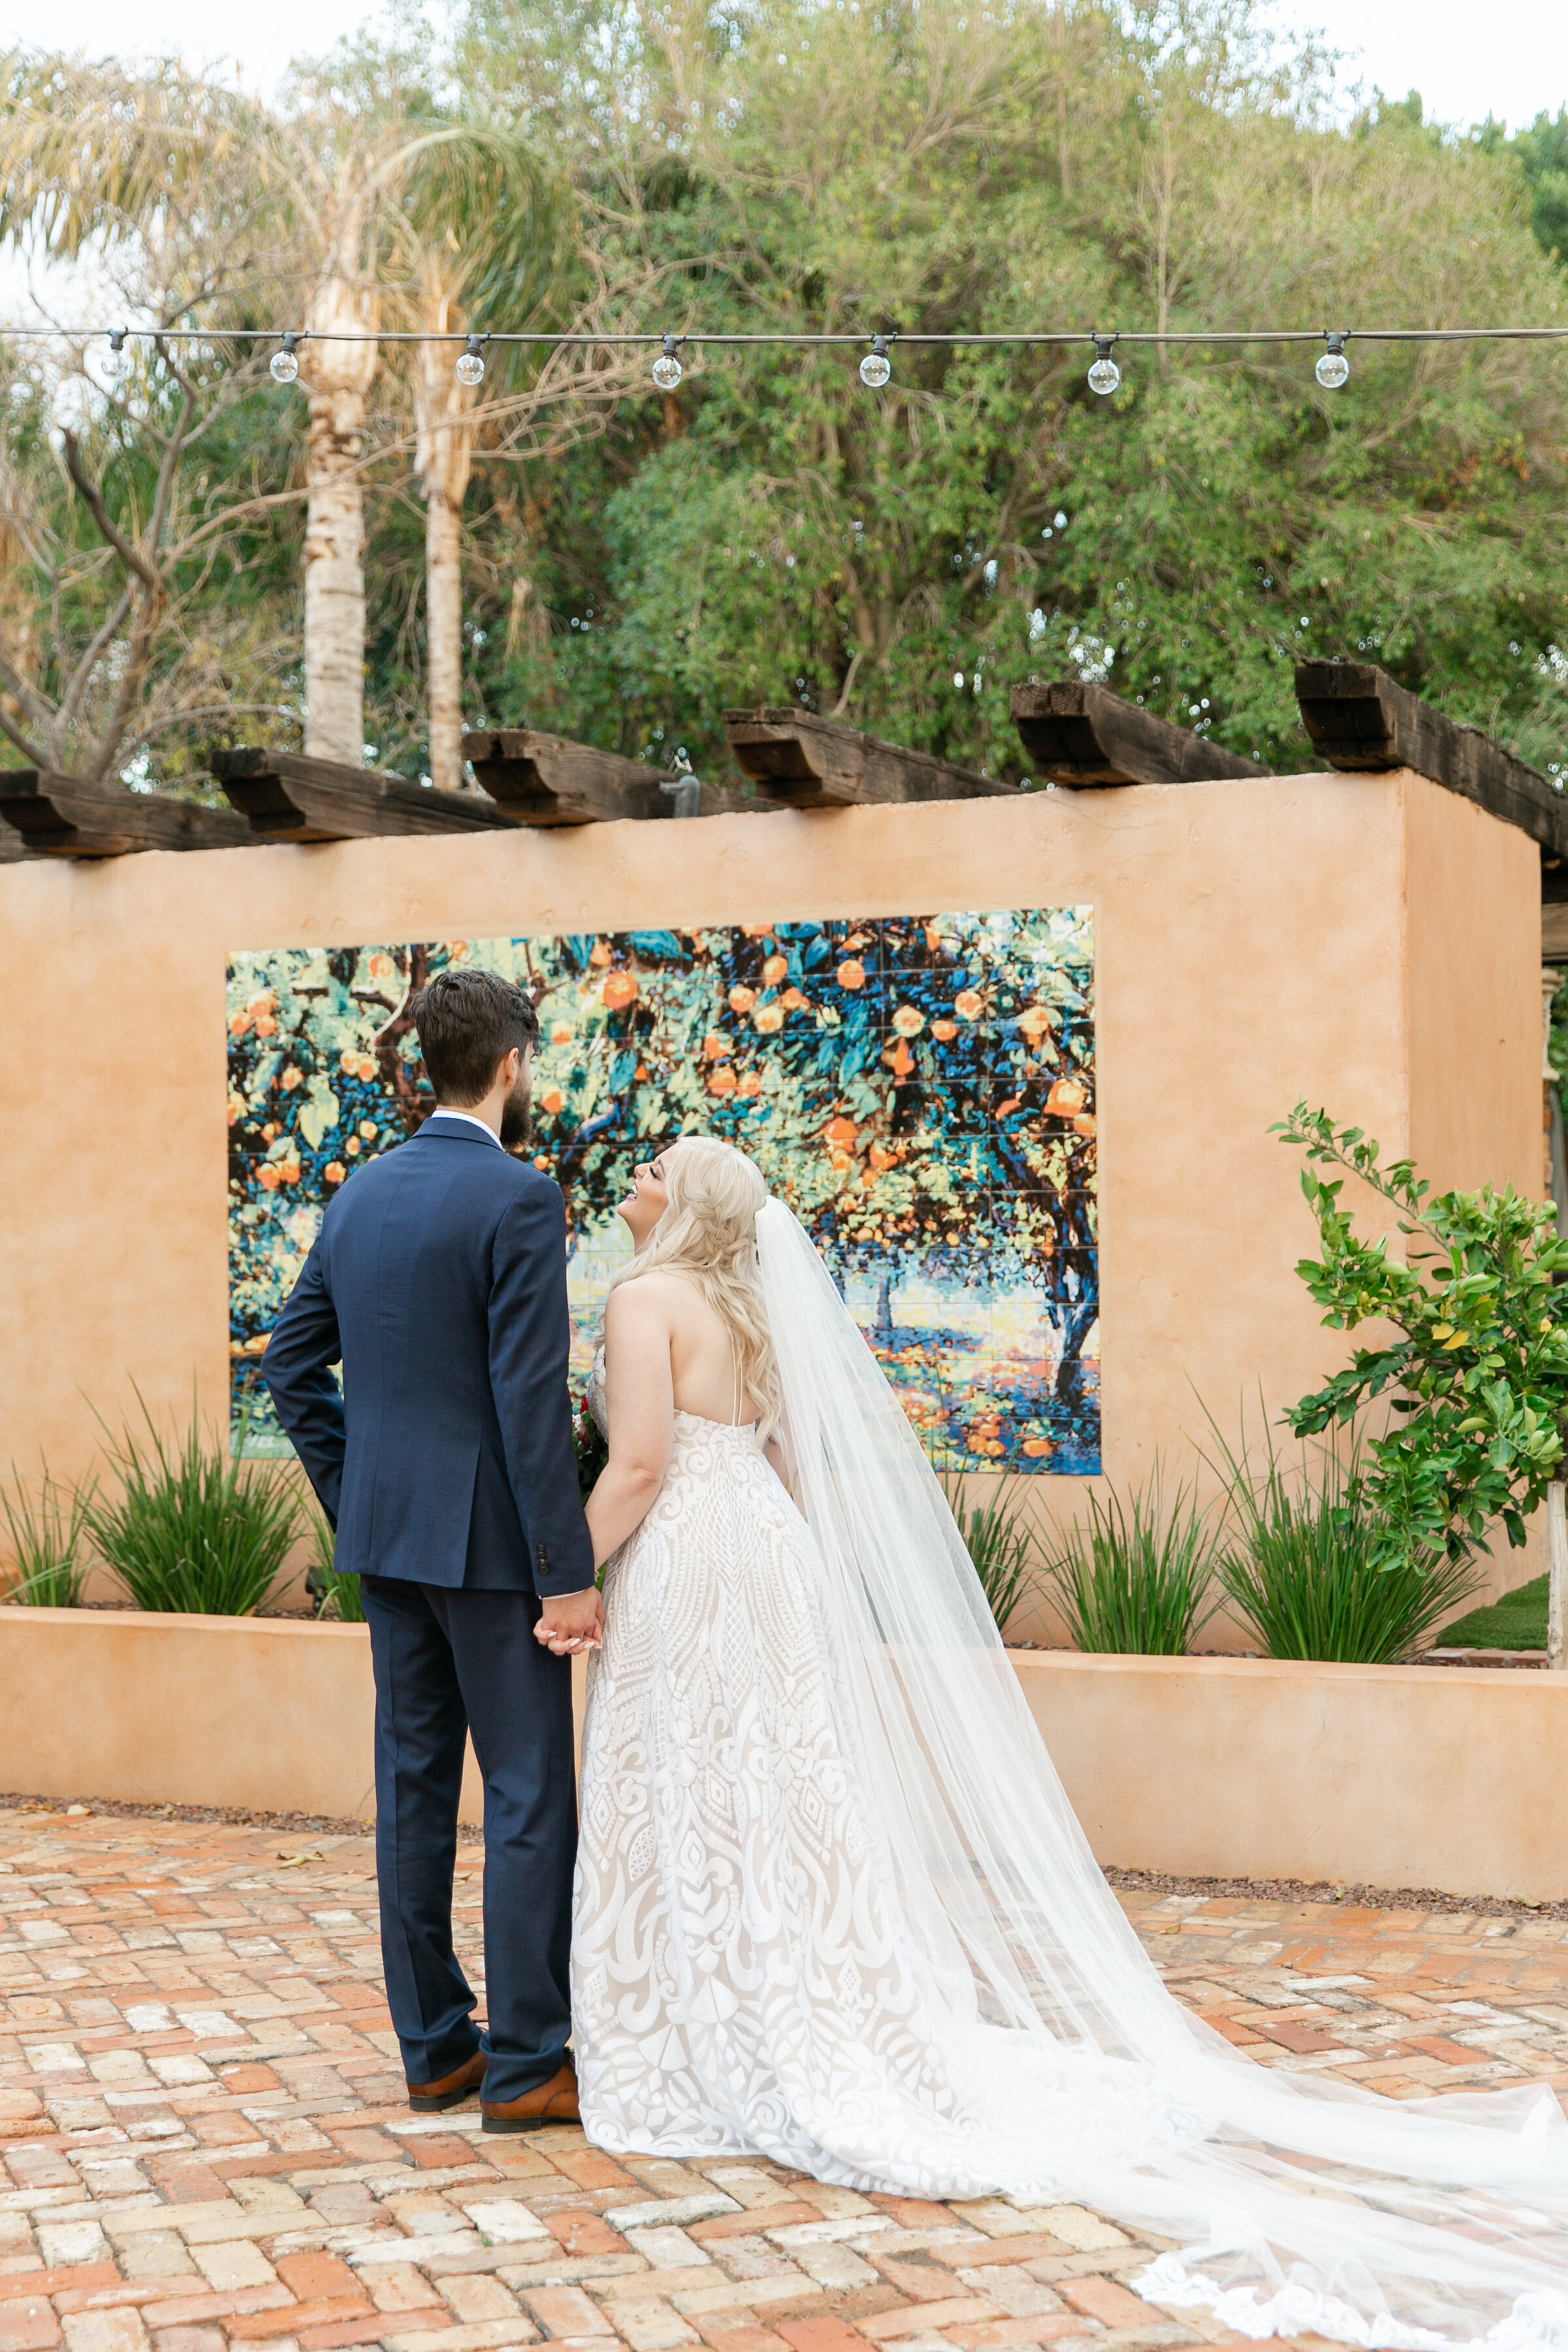 Karlie Colleen Photography - The Royal Palms Wedding - Some Like It Classic - Alex & Sam-532